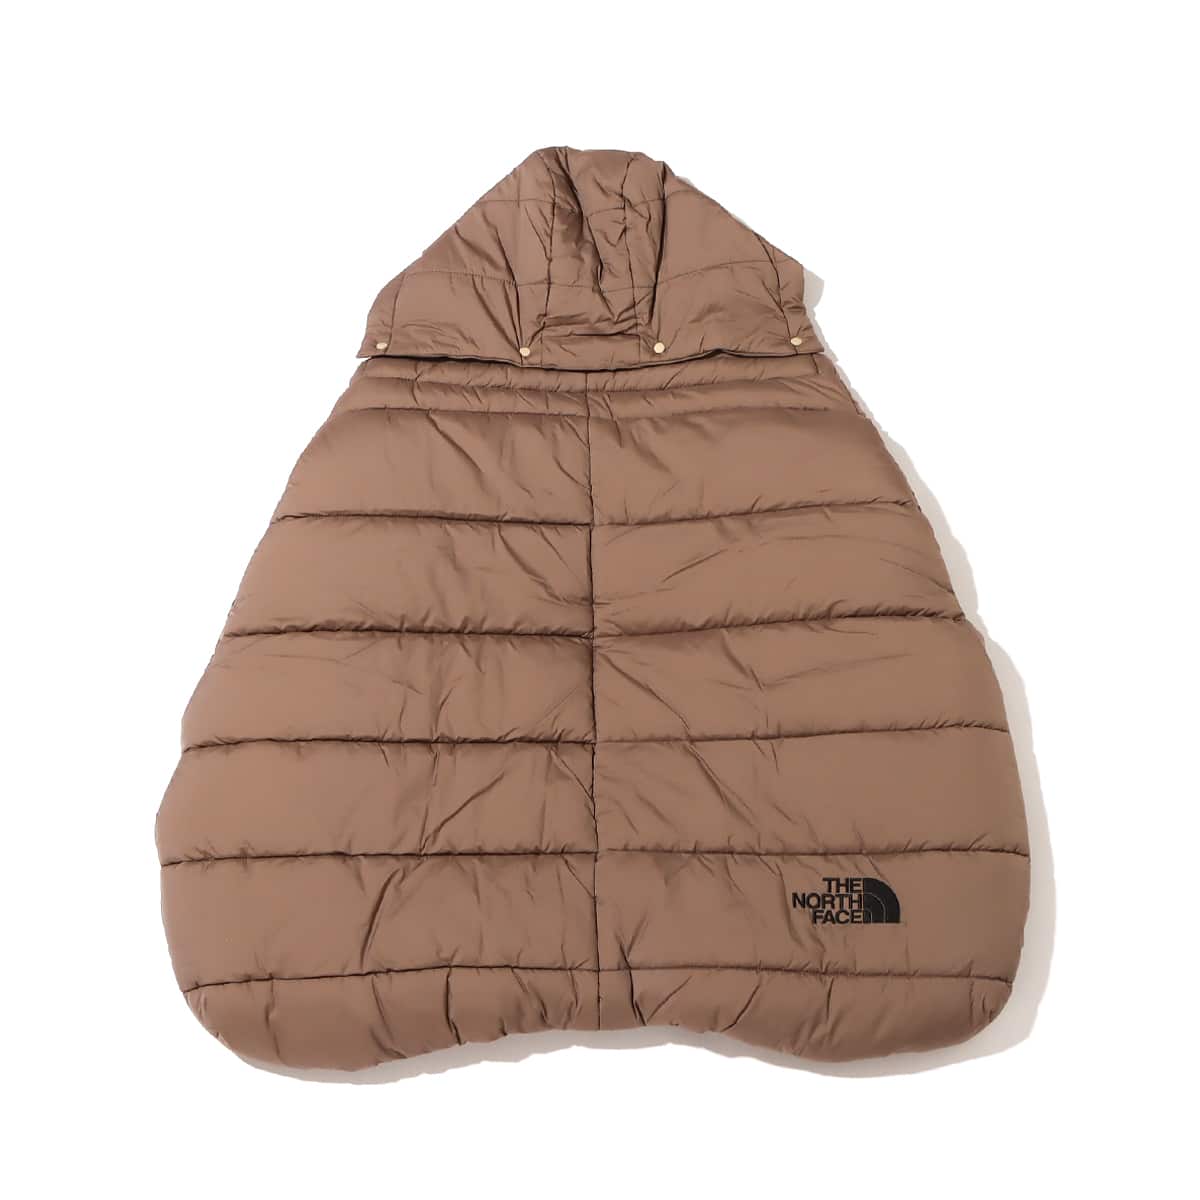 THE NORTH FACE BABY SHELL BLANKET ウォルナット 22FW-I